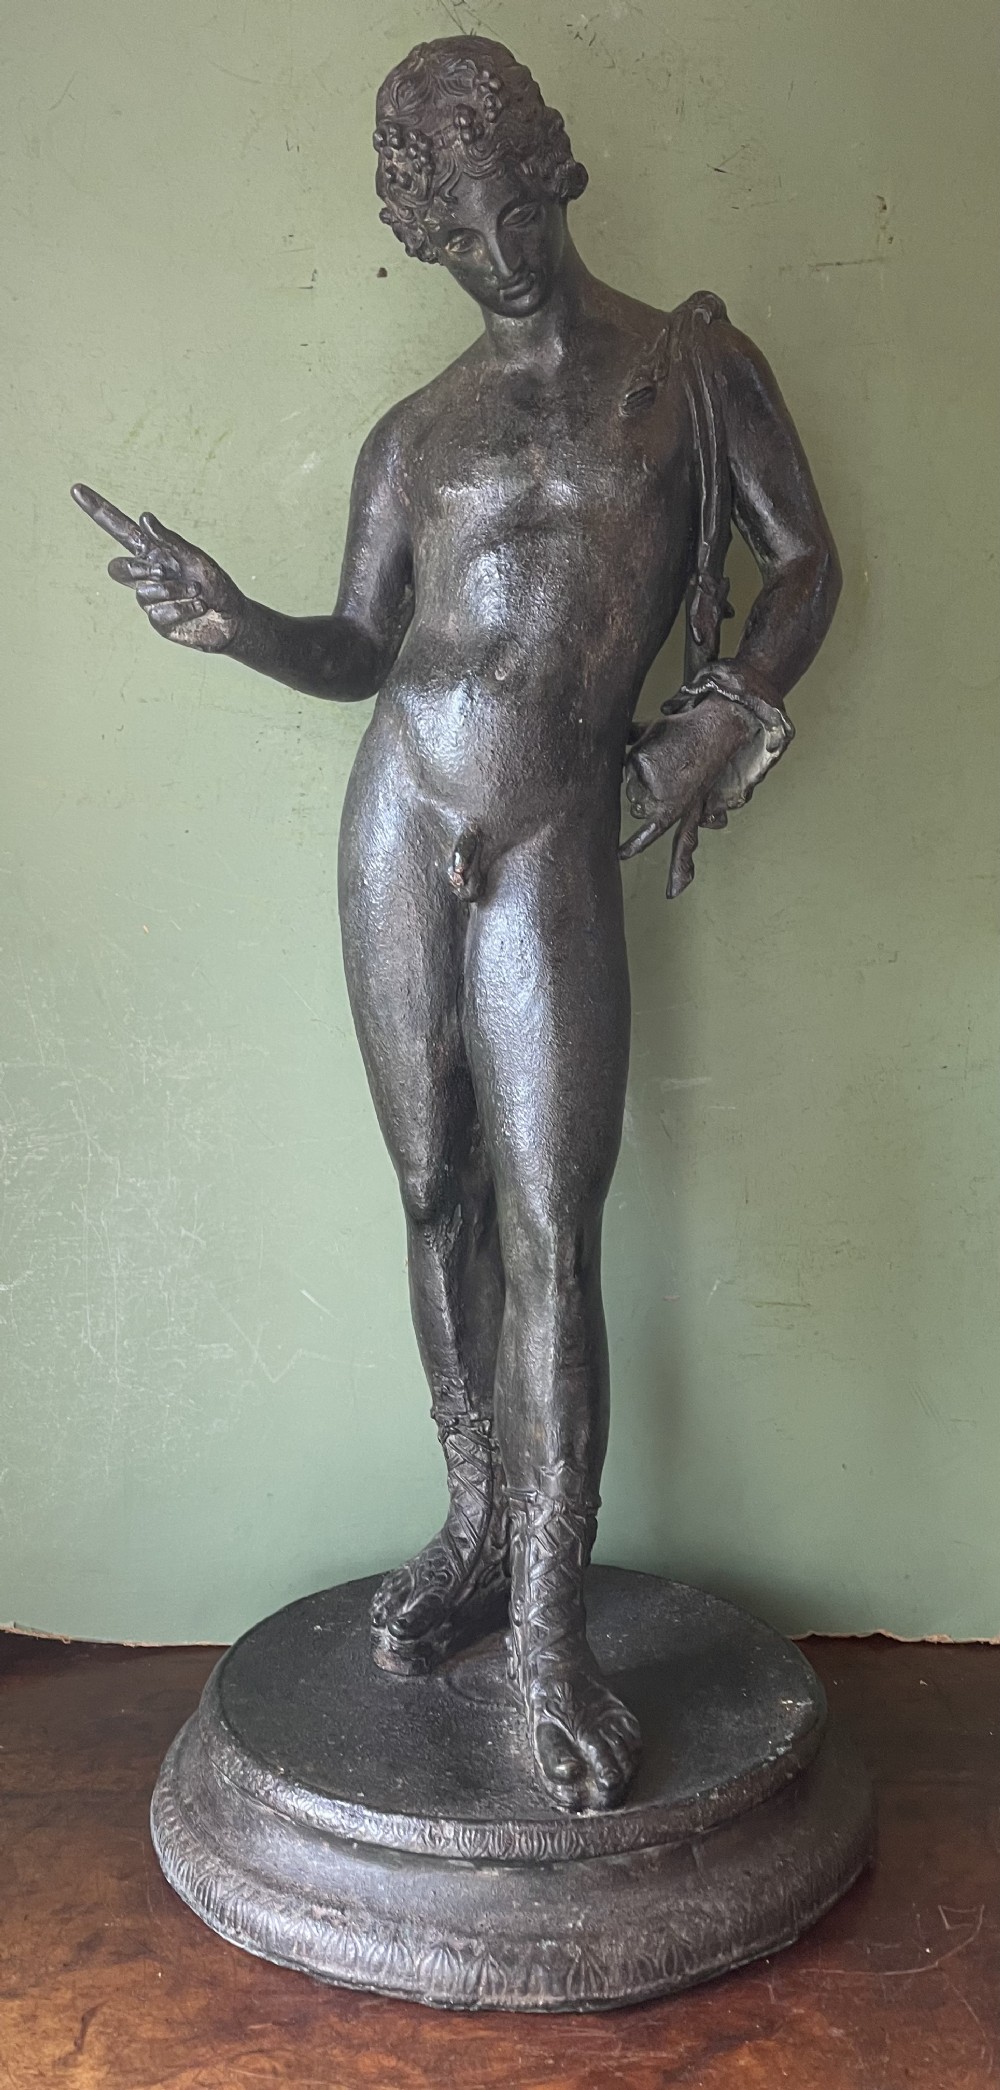 large late c19th italian neapolitan grand tour souvenir bronze sculpture after the antique of dionysus known as narcissus